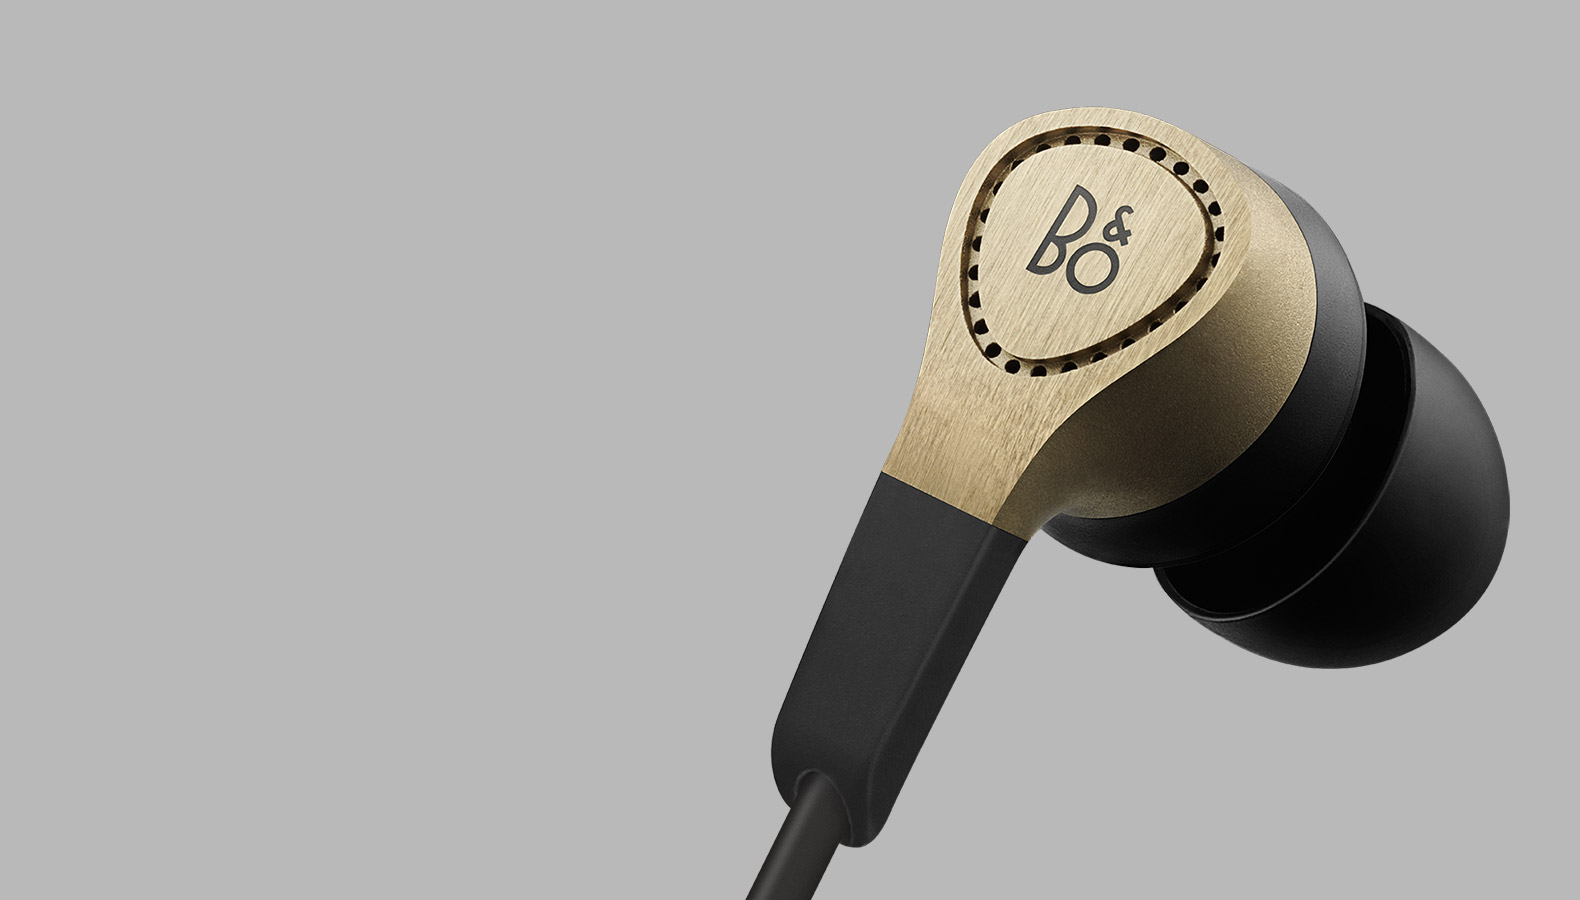 Beoplay H3